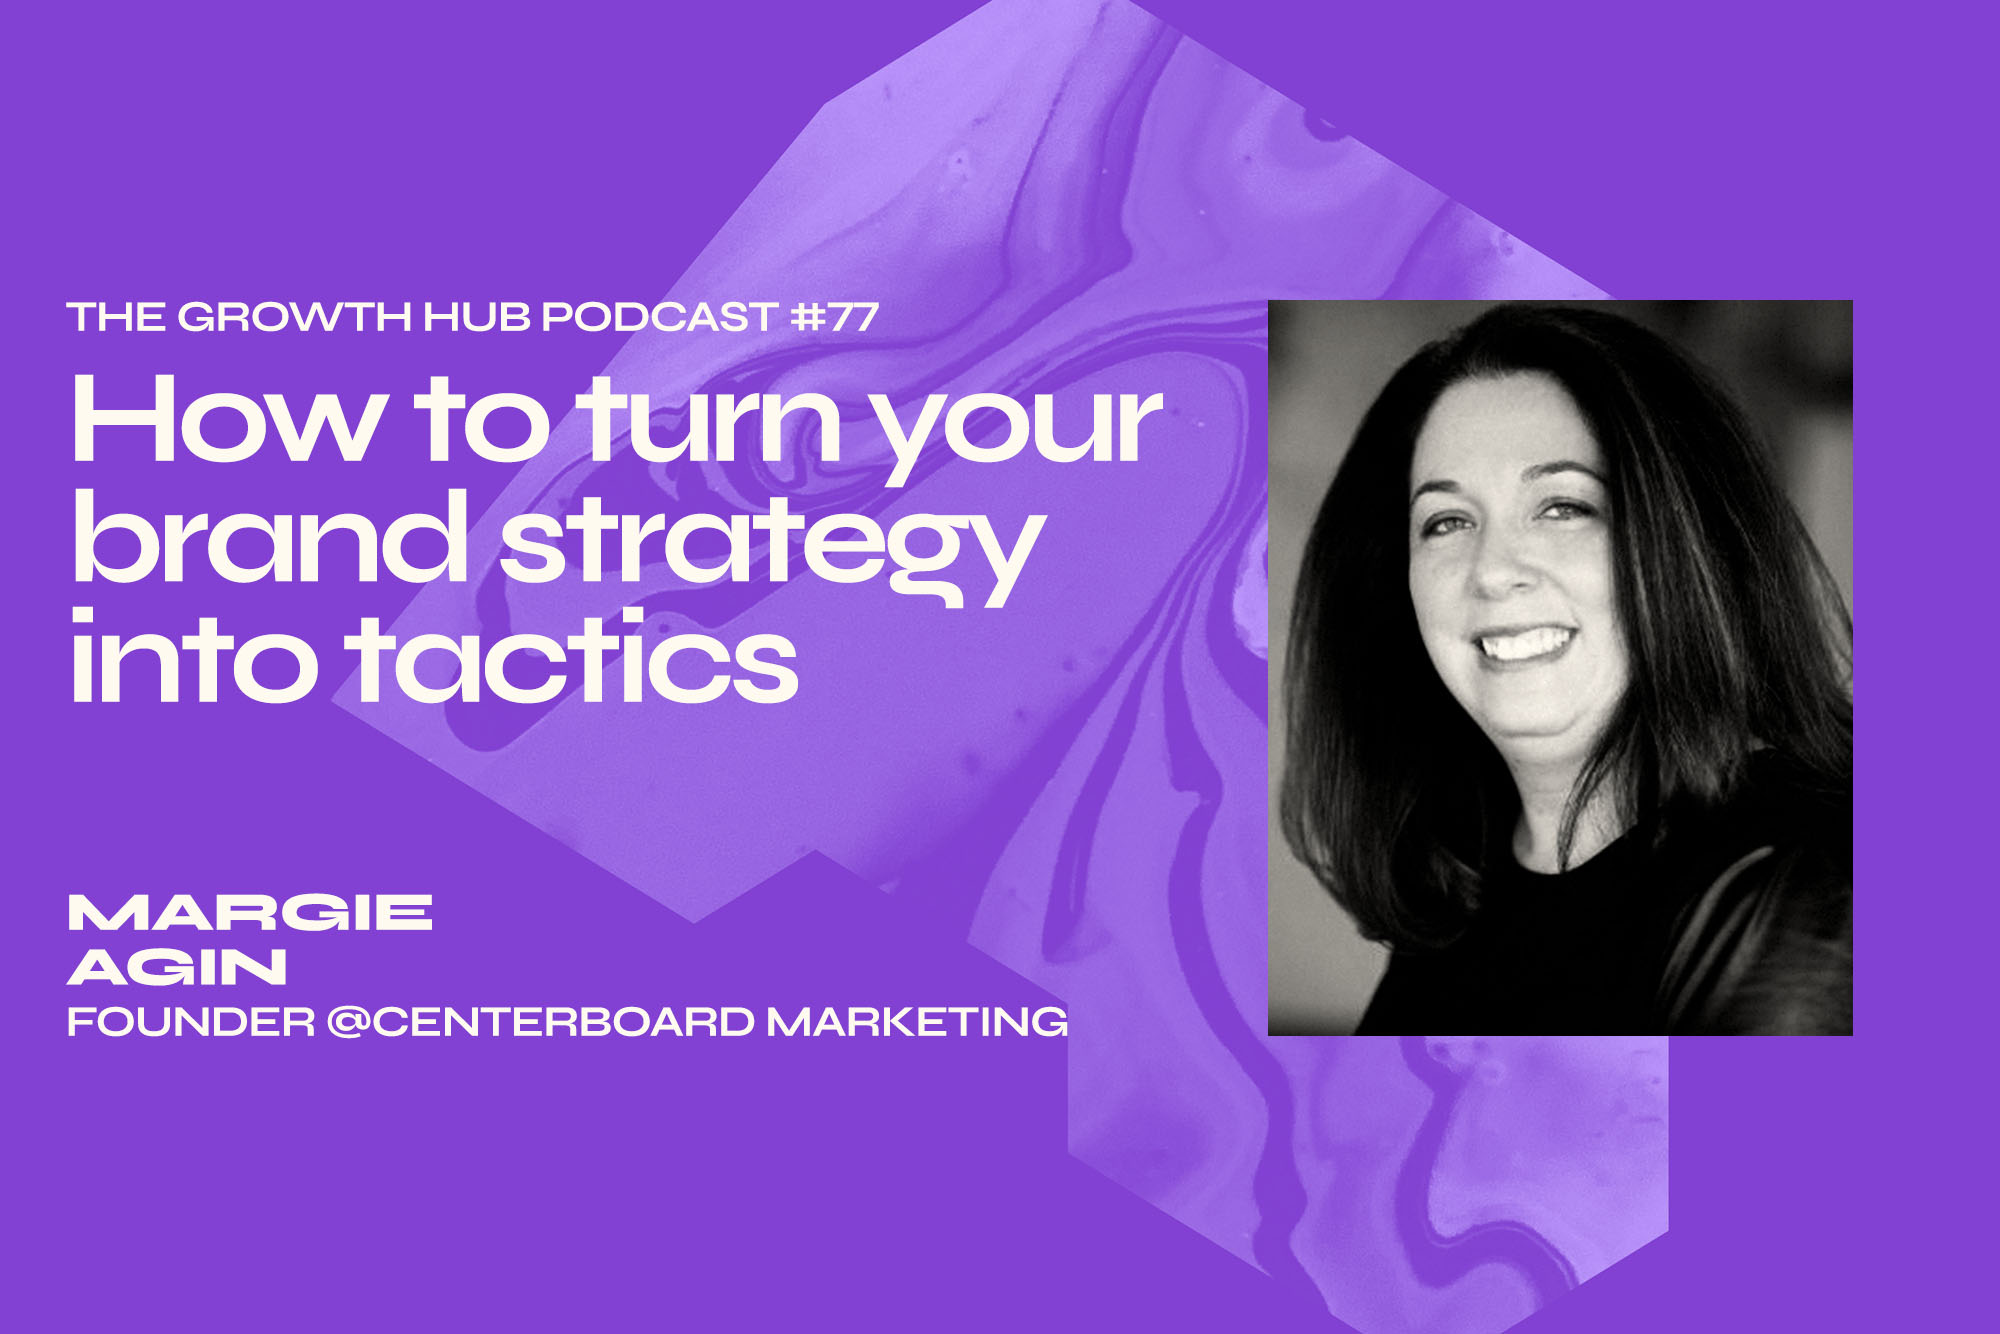 How To Turn Your Brand Strategy Into Tactics with Margie Agin, Founder at Centerboard Marketing